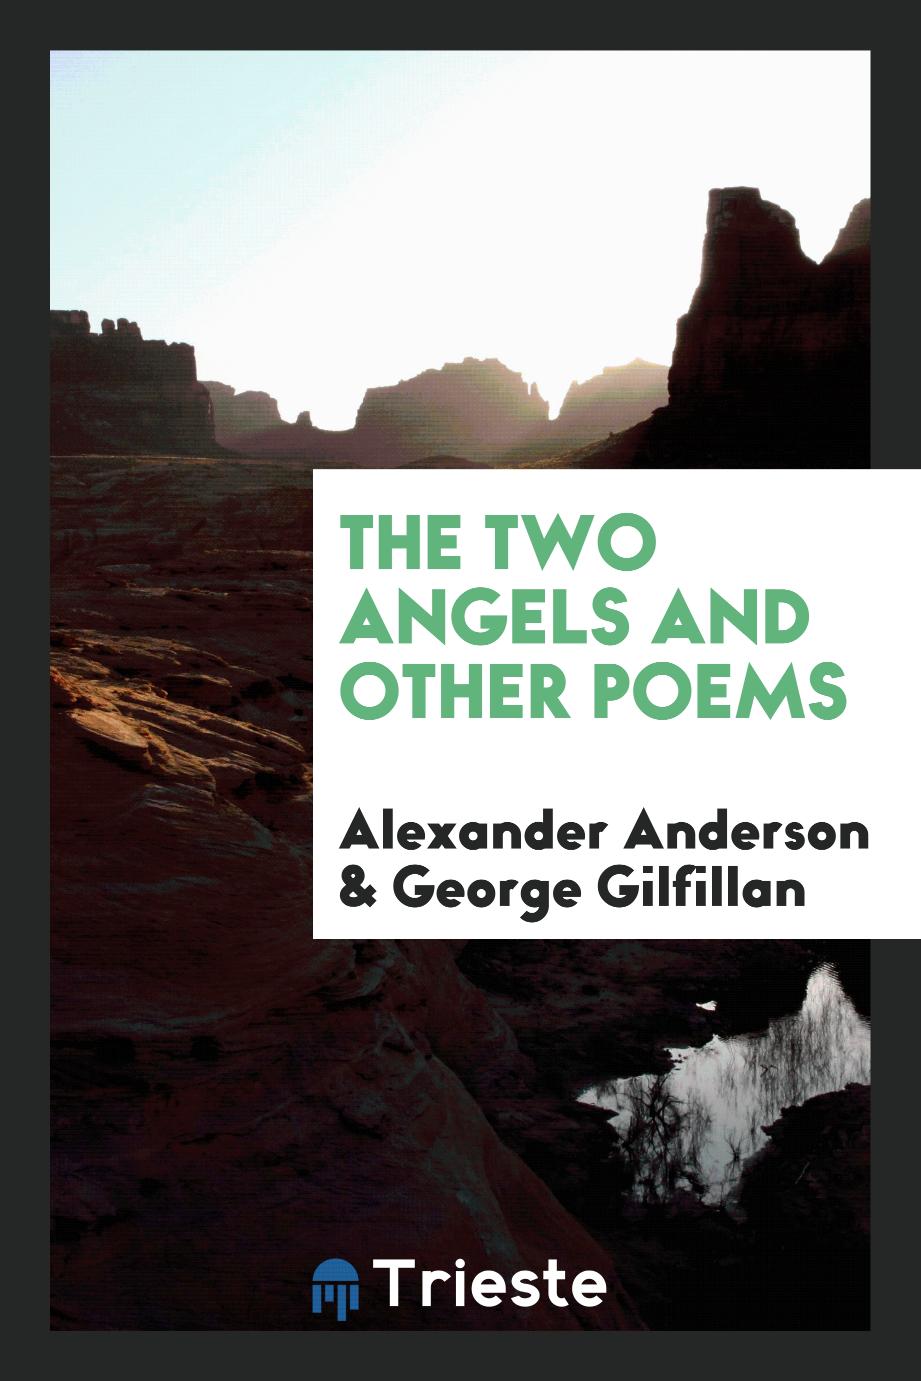 The two angels and other poems